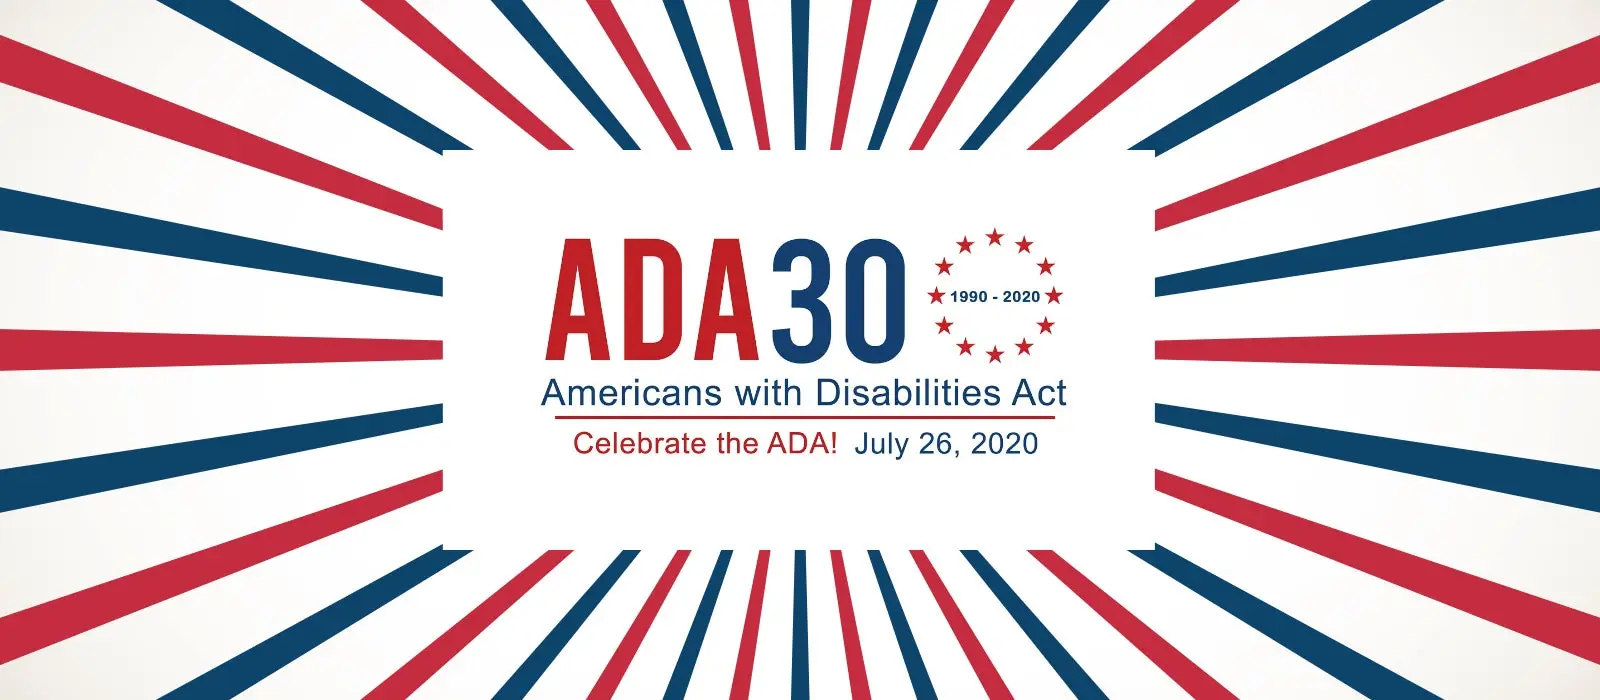 ADA30, Americans with Disabilities Act, Celebrate the ADA! July 26, 2020